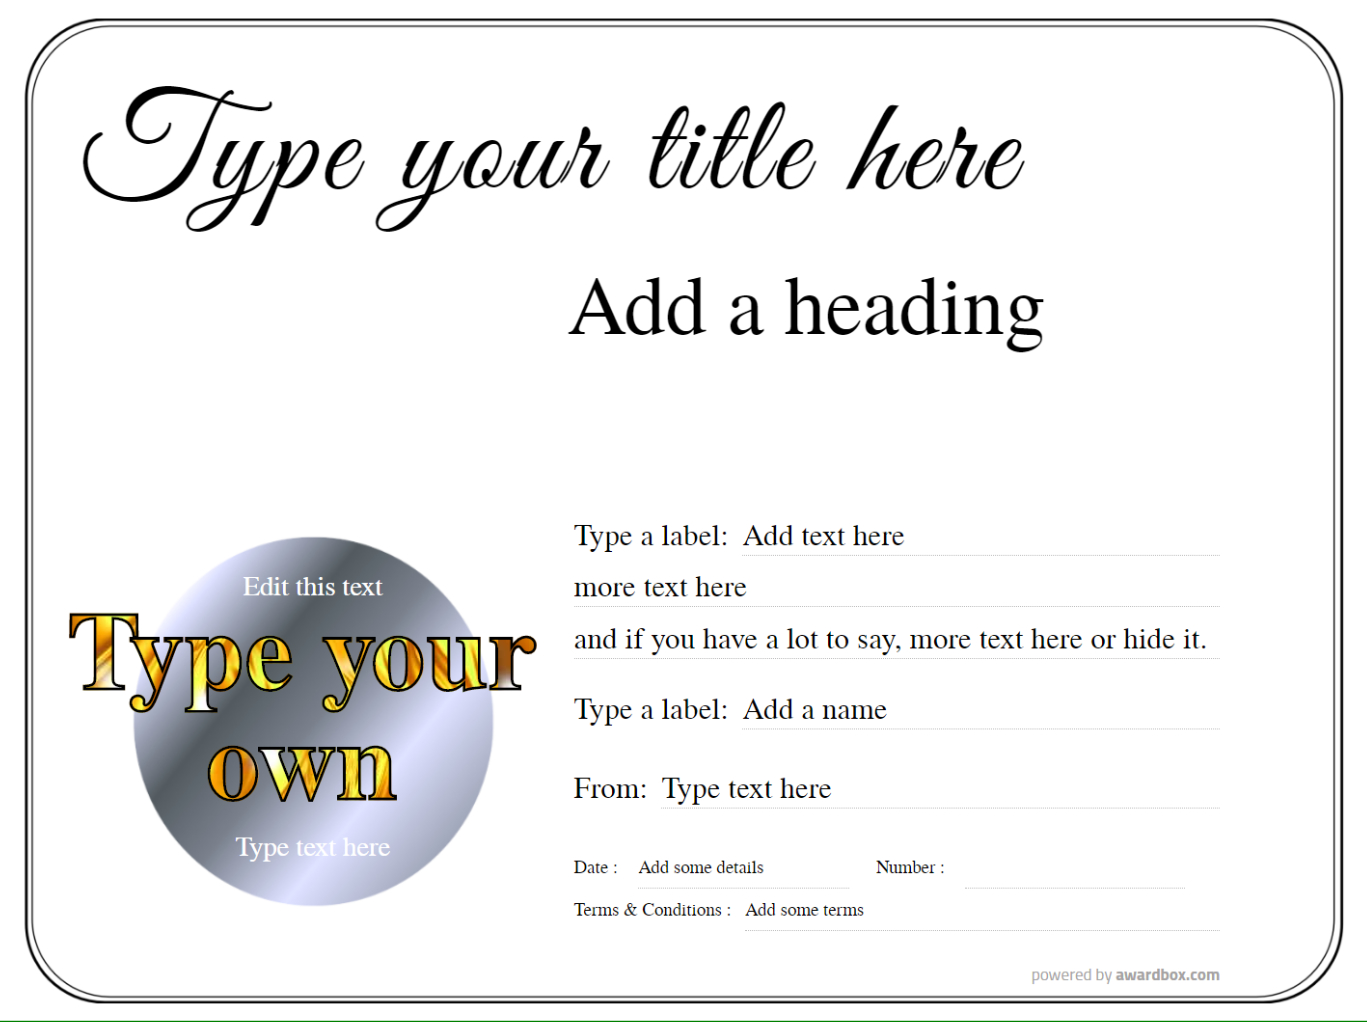 Free Gift Certificate Templates And Ideas Fully Editable